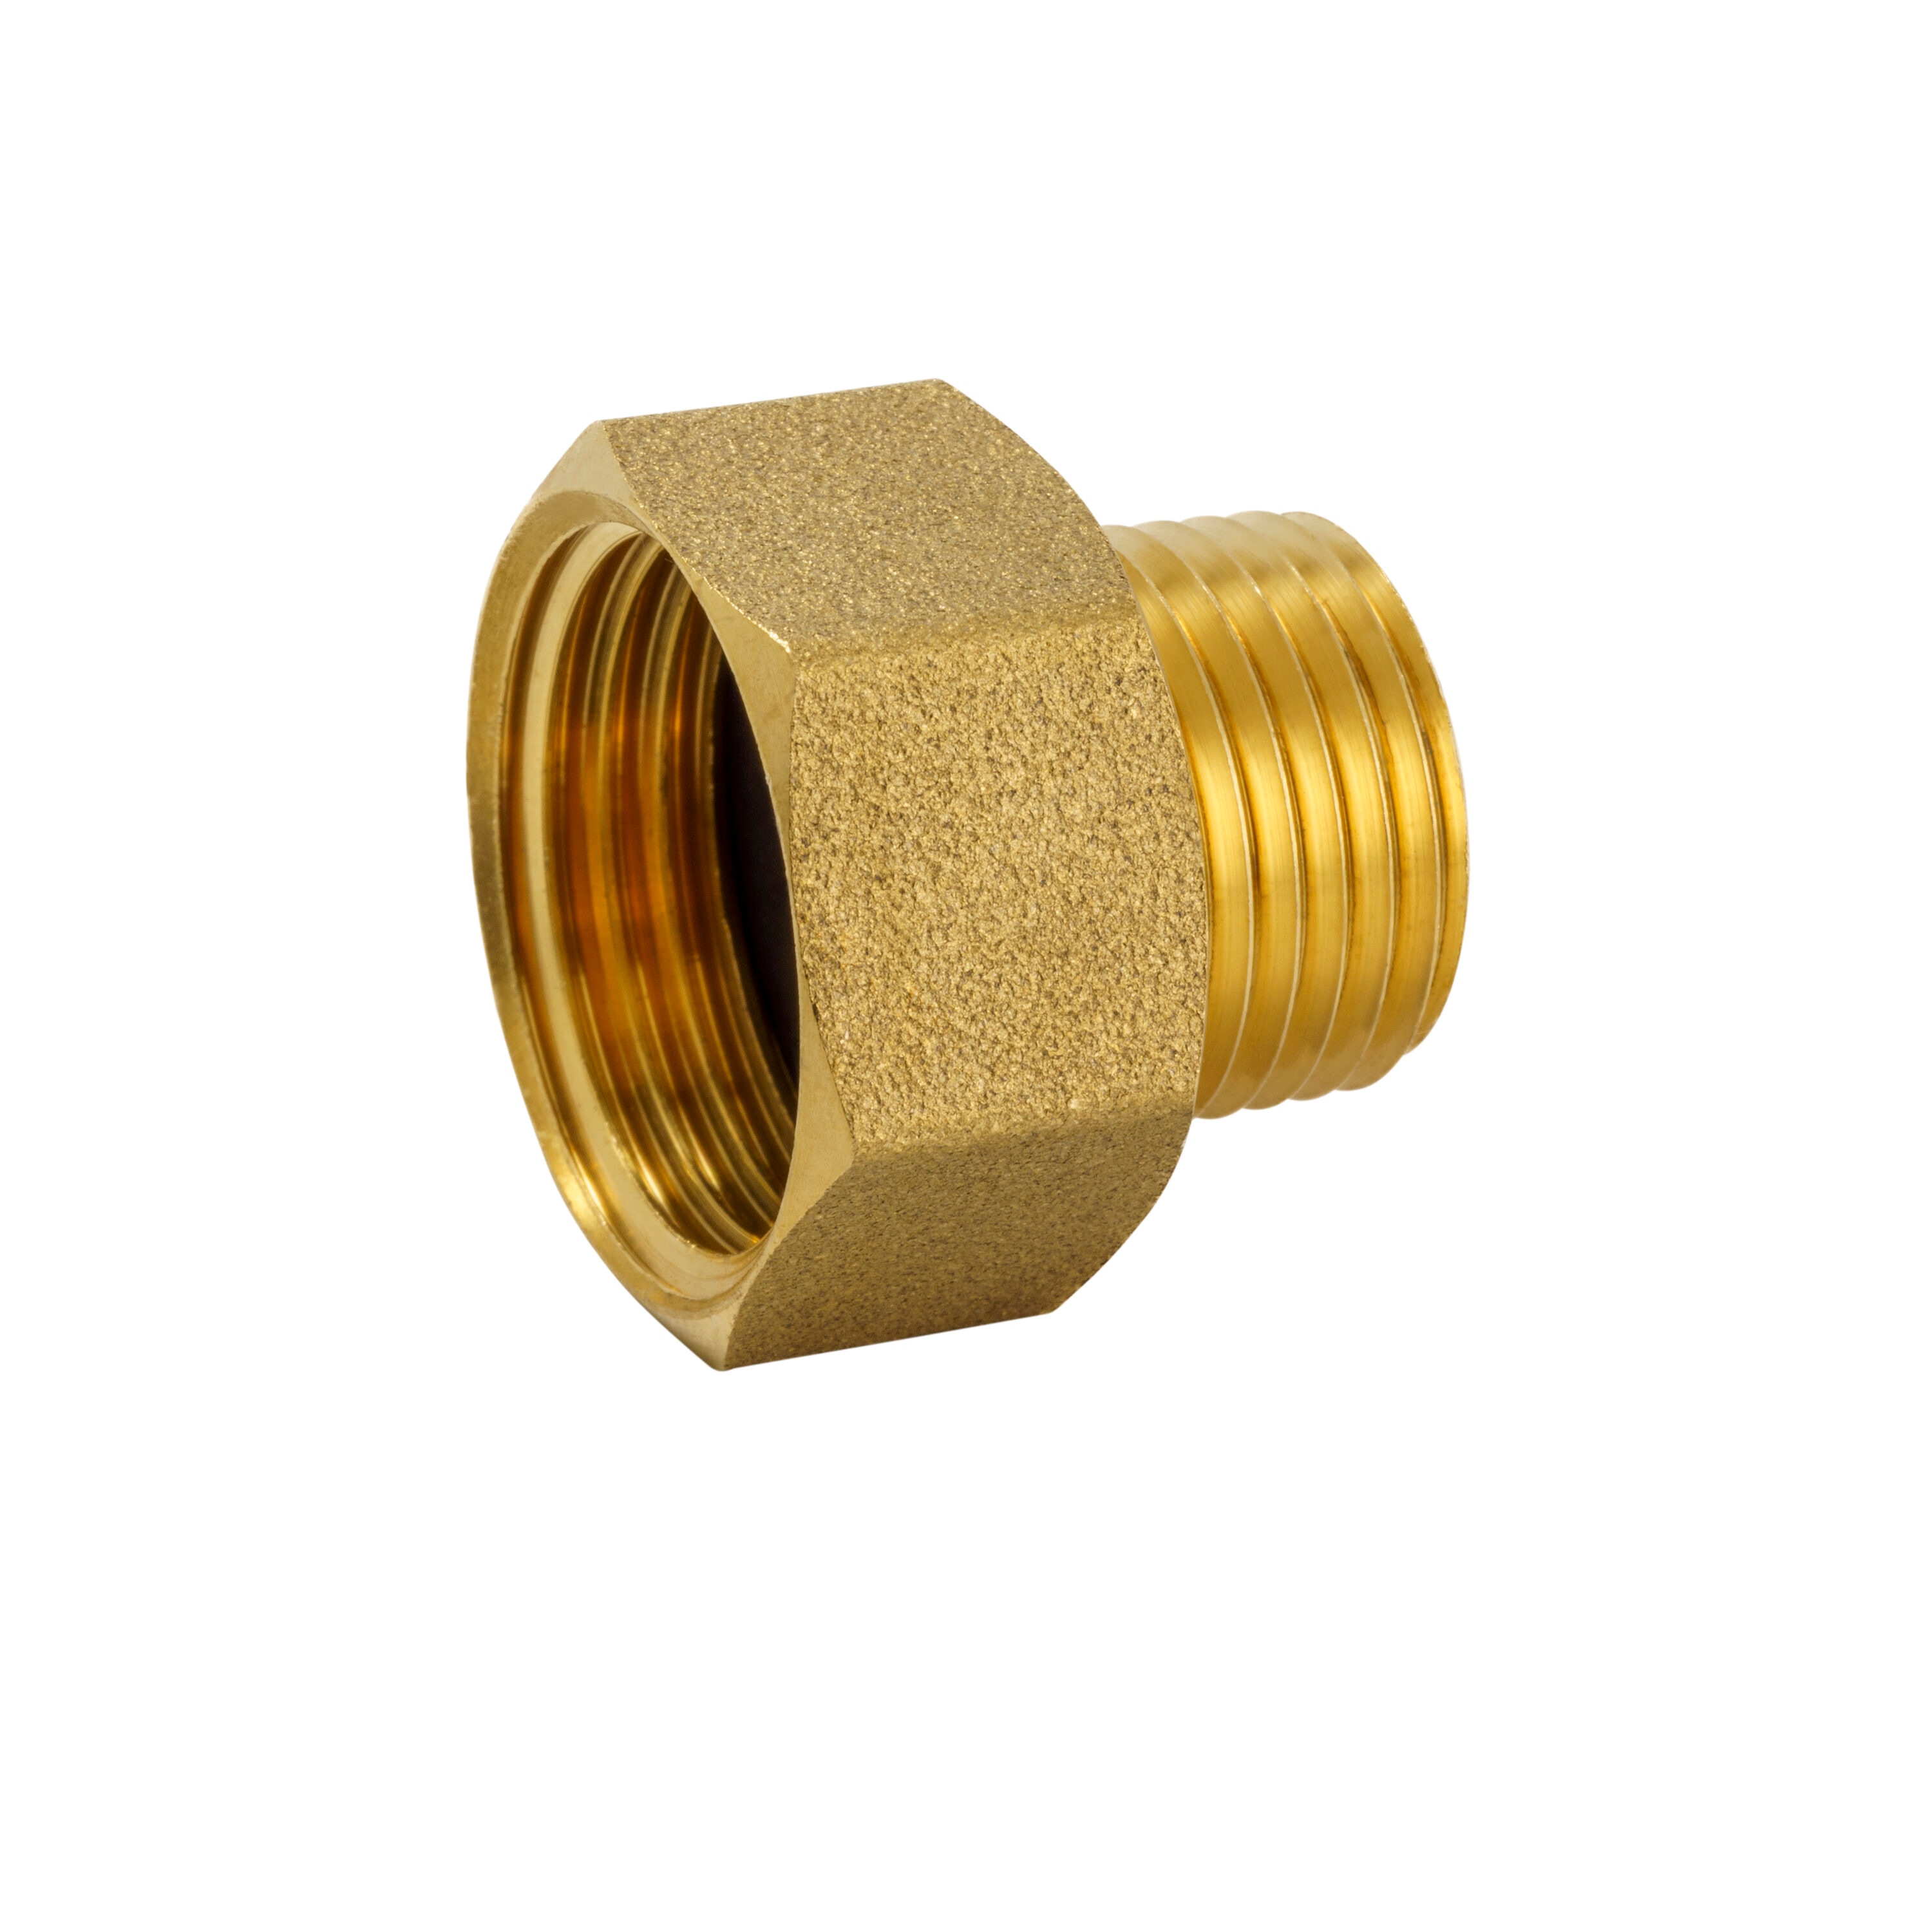 Everbilt 1/2 FEMALE OD Compression Adapter Brass Reducing Coupling Fitting